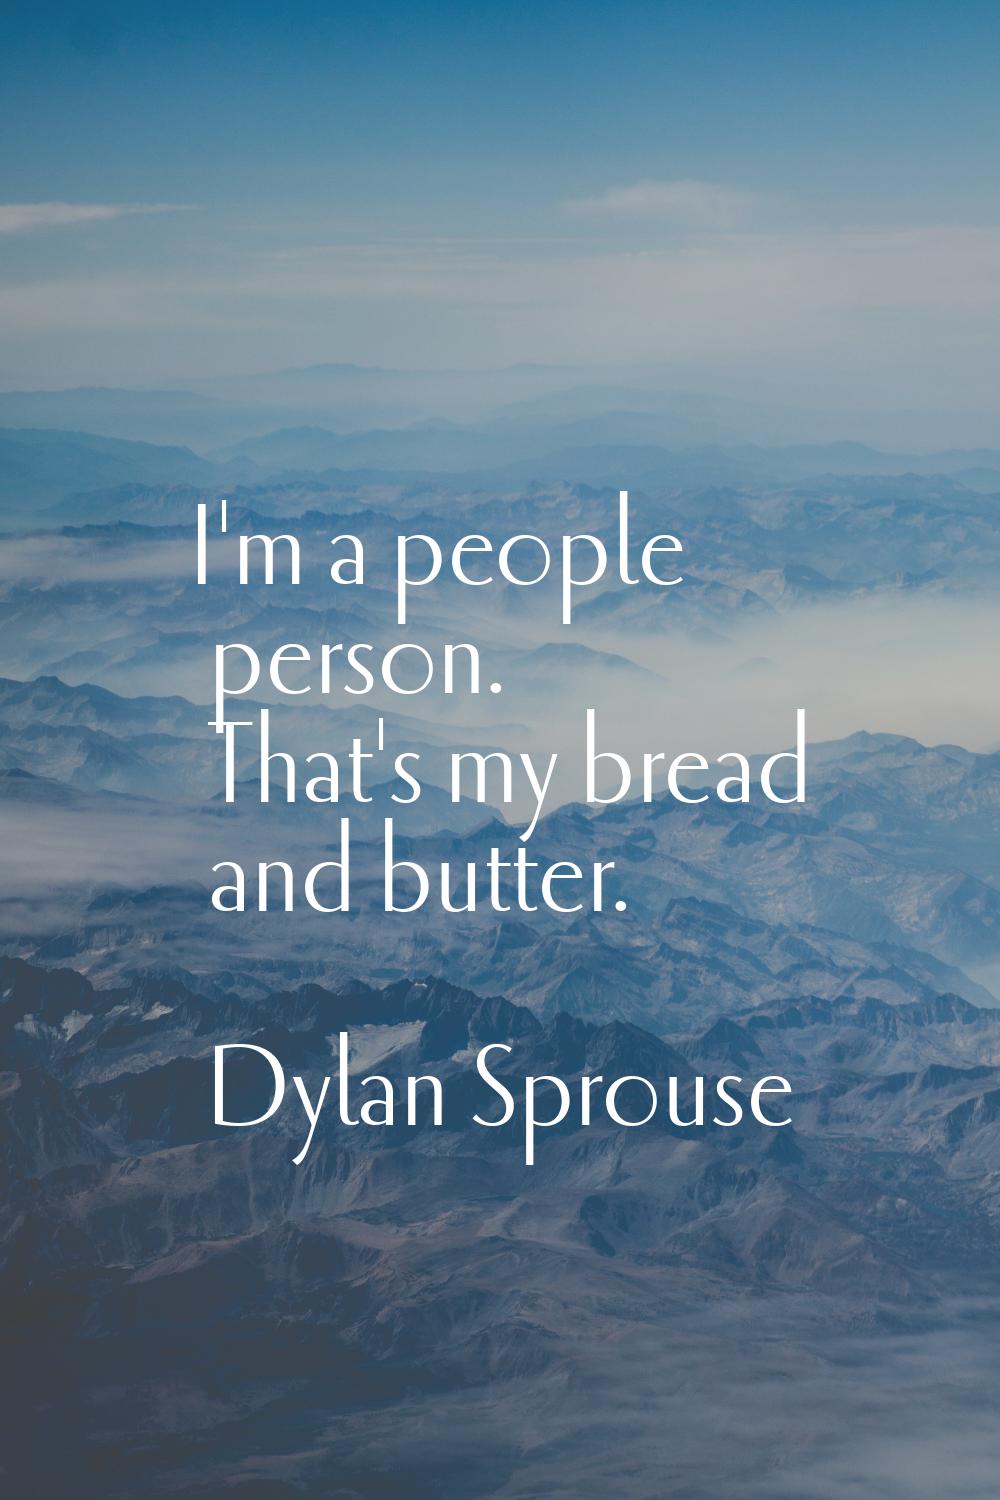 I'm a people person. That's my bread and butter.